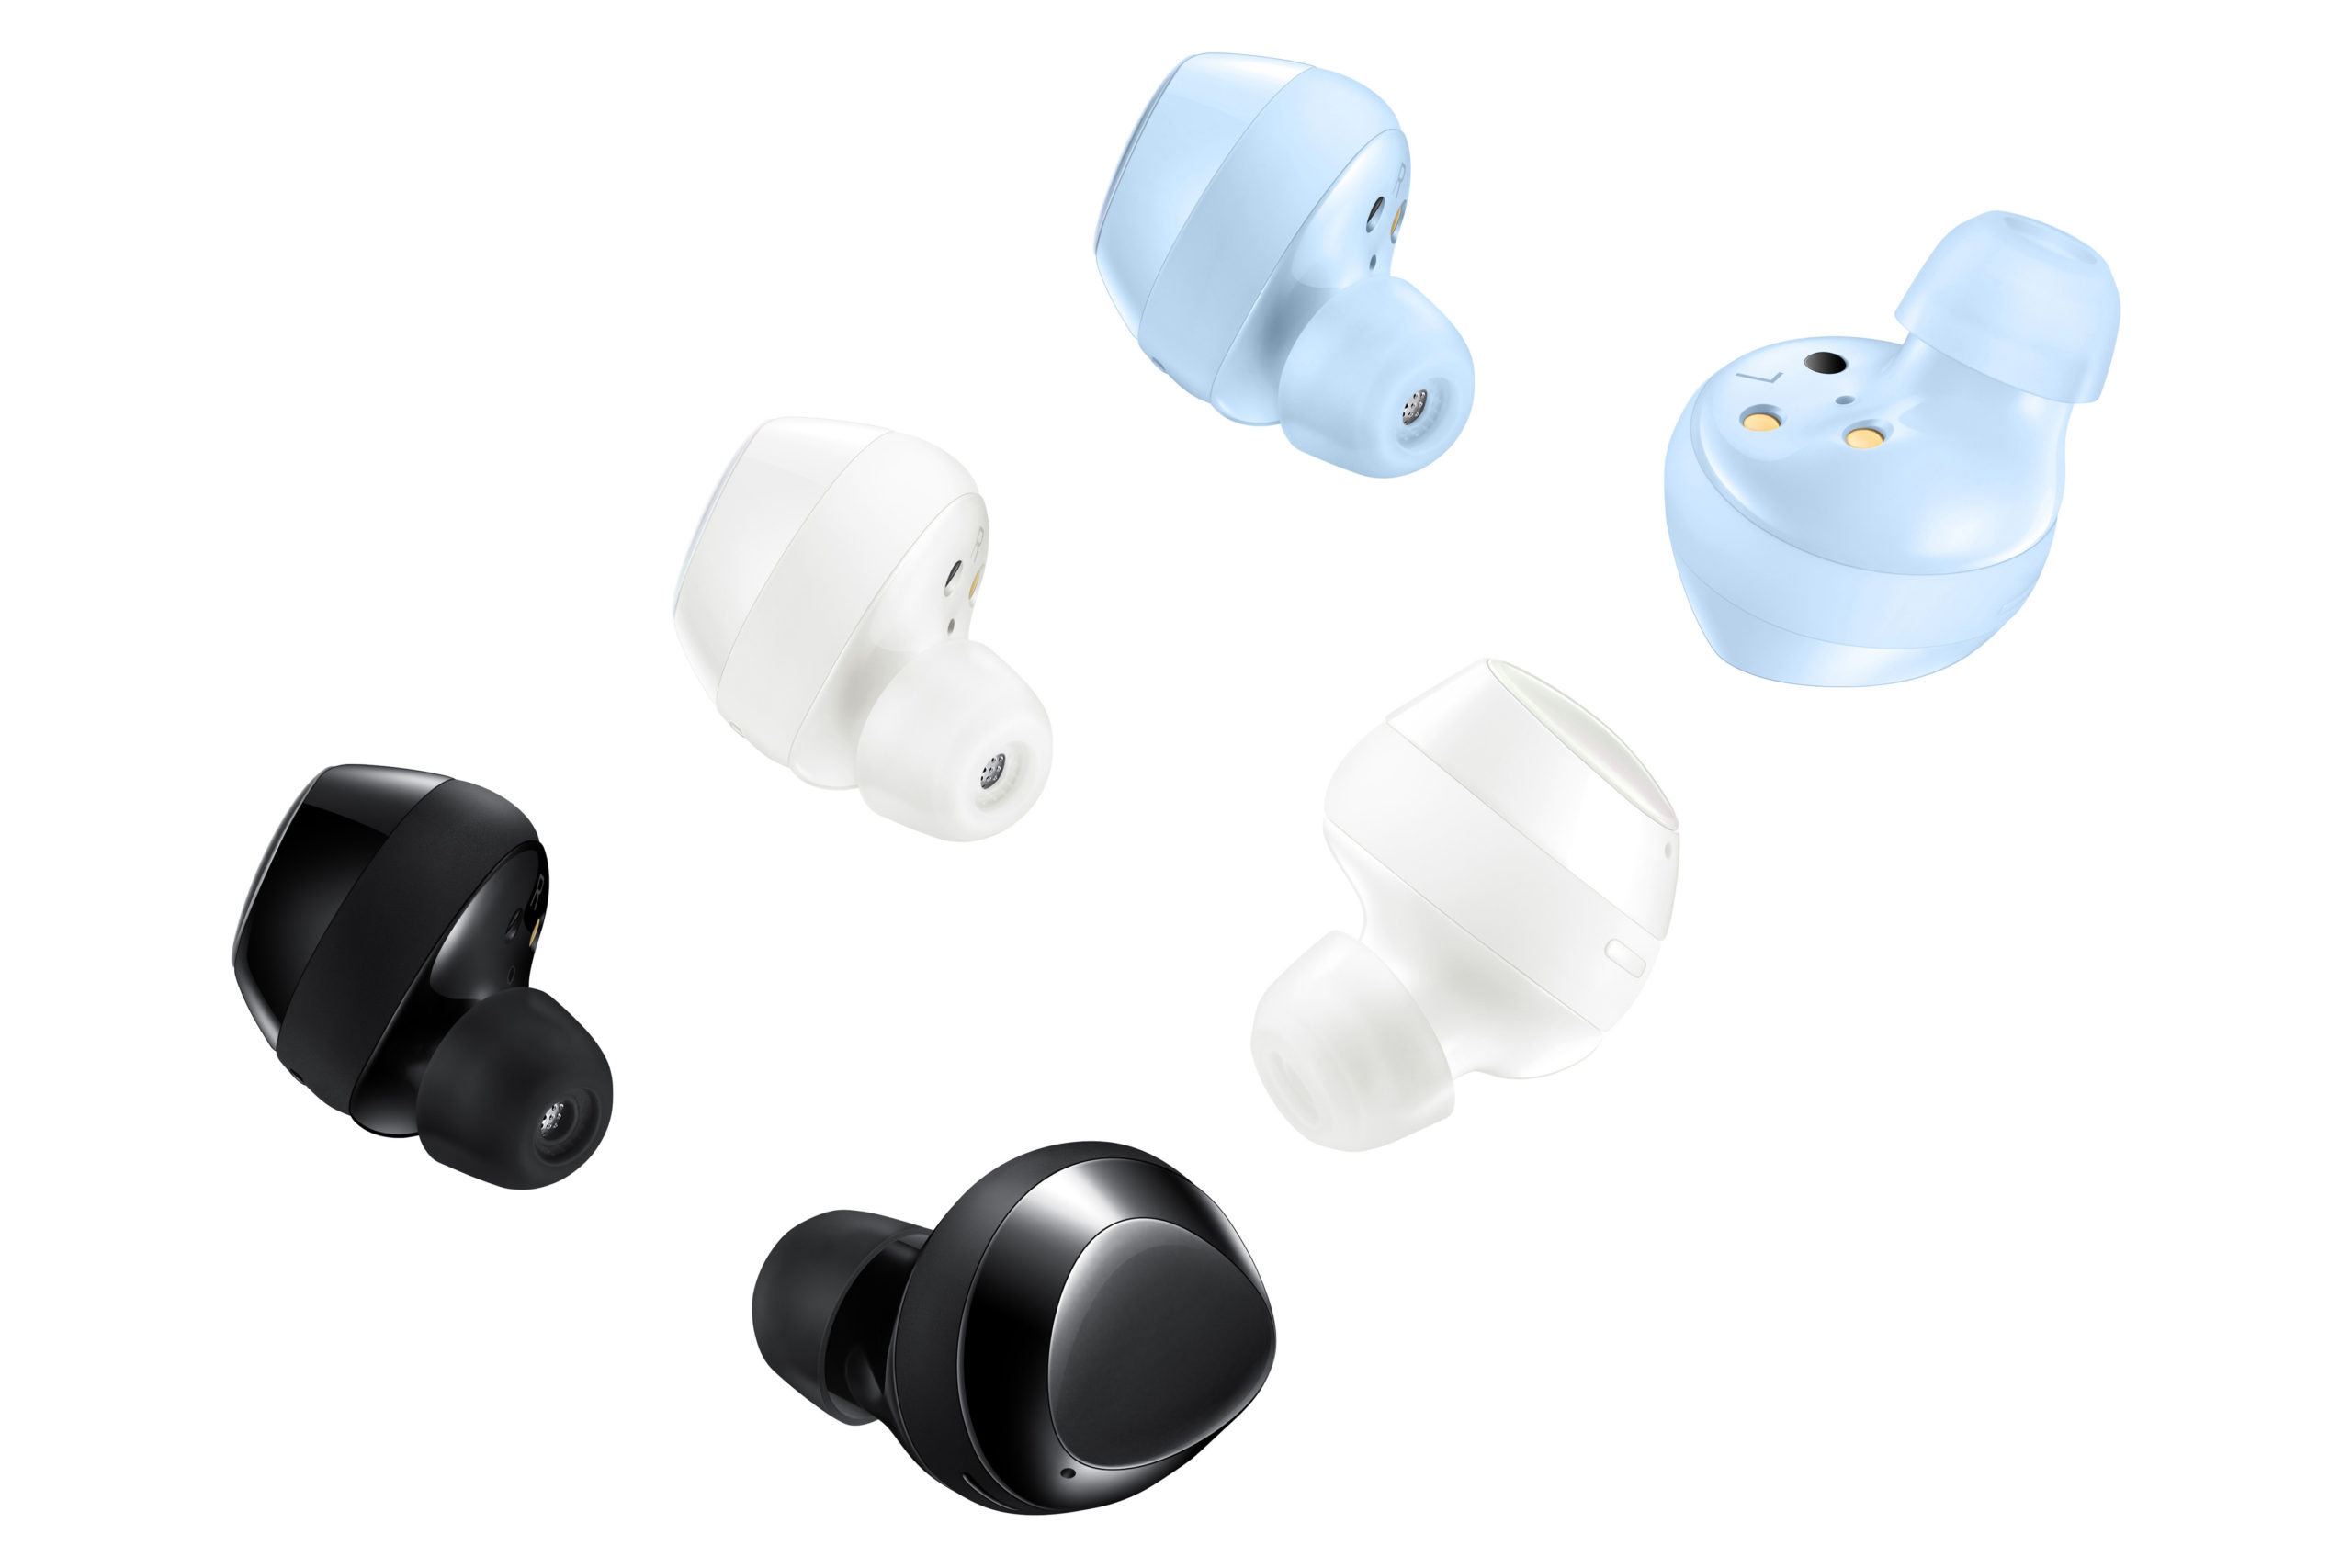 Galaxy Buds+: Change the way you experience sound